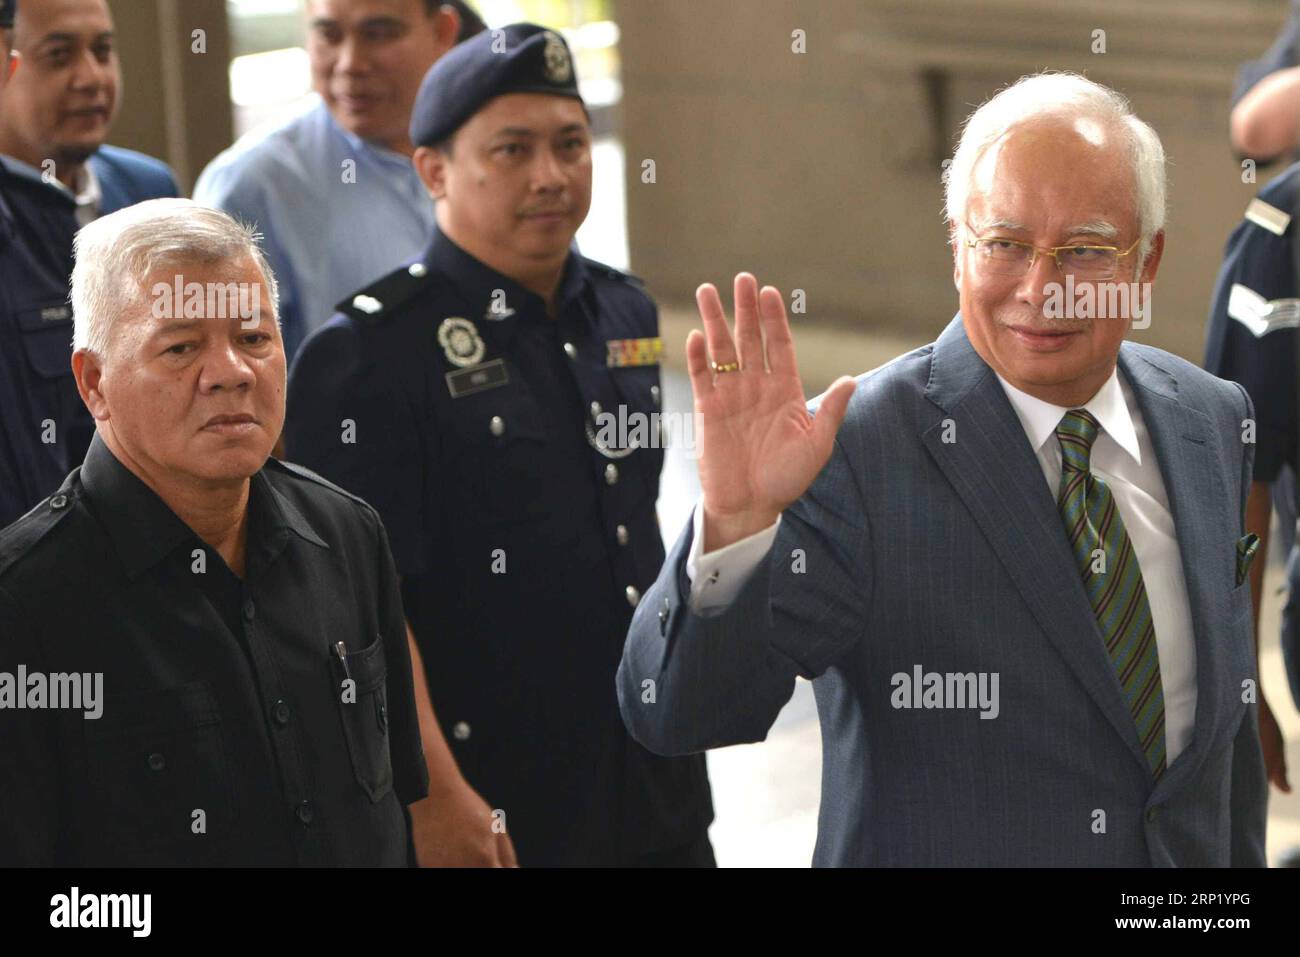 (180808) -- KUALA LUMPUR, Aug. 8, 2018 -- Former Malaysian Prime Minister Najib Razak (R) appears at the Kuala Lumpur Courts complex in Kuala Lumpur in Malaysia, Aug. 8, 2018. Former Malaysian Prime Minister Najib Razak on Wednesday was charged with three offenses related to money-laundering and anti-terrorism financing, in addition to several counts of criminal breach of trust and corruption charges that were served in early July. ) (lrz) MALAYSIA-KUALA LUMPUR-NAJIB-CHARGES ChongxVoonxChung PUBLICATIONxNOTxINxCHN Stock Photo